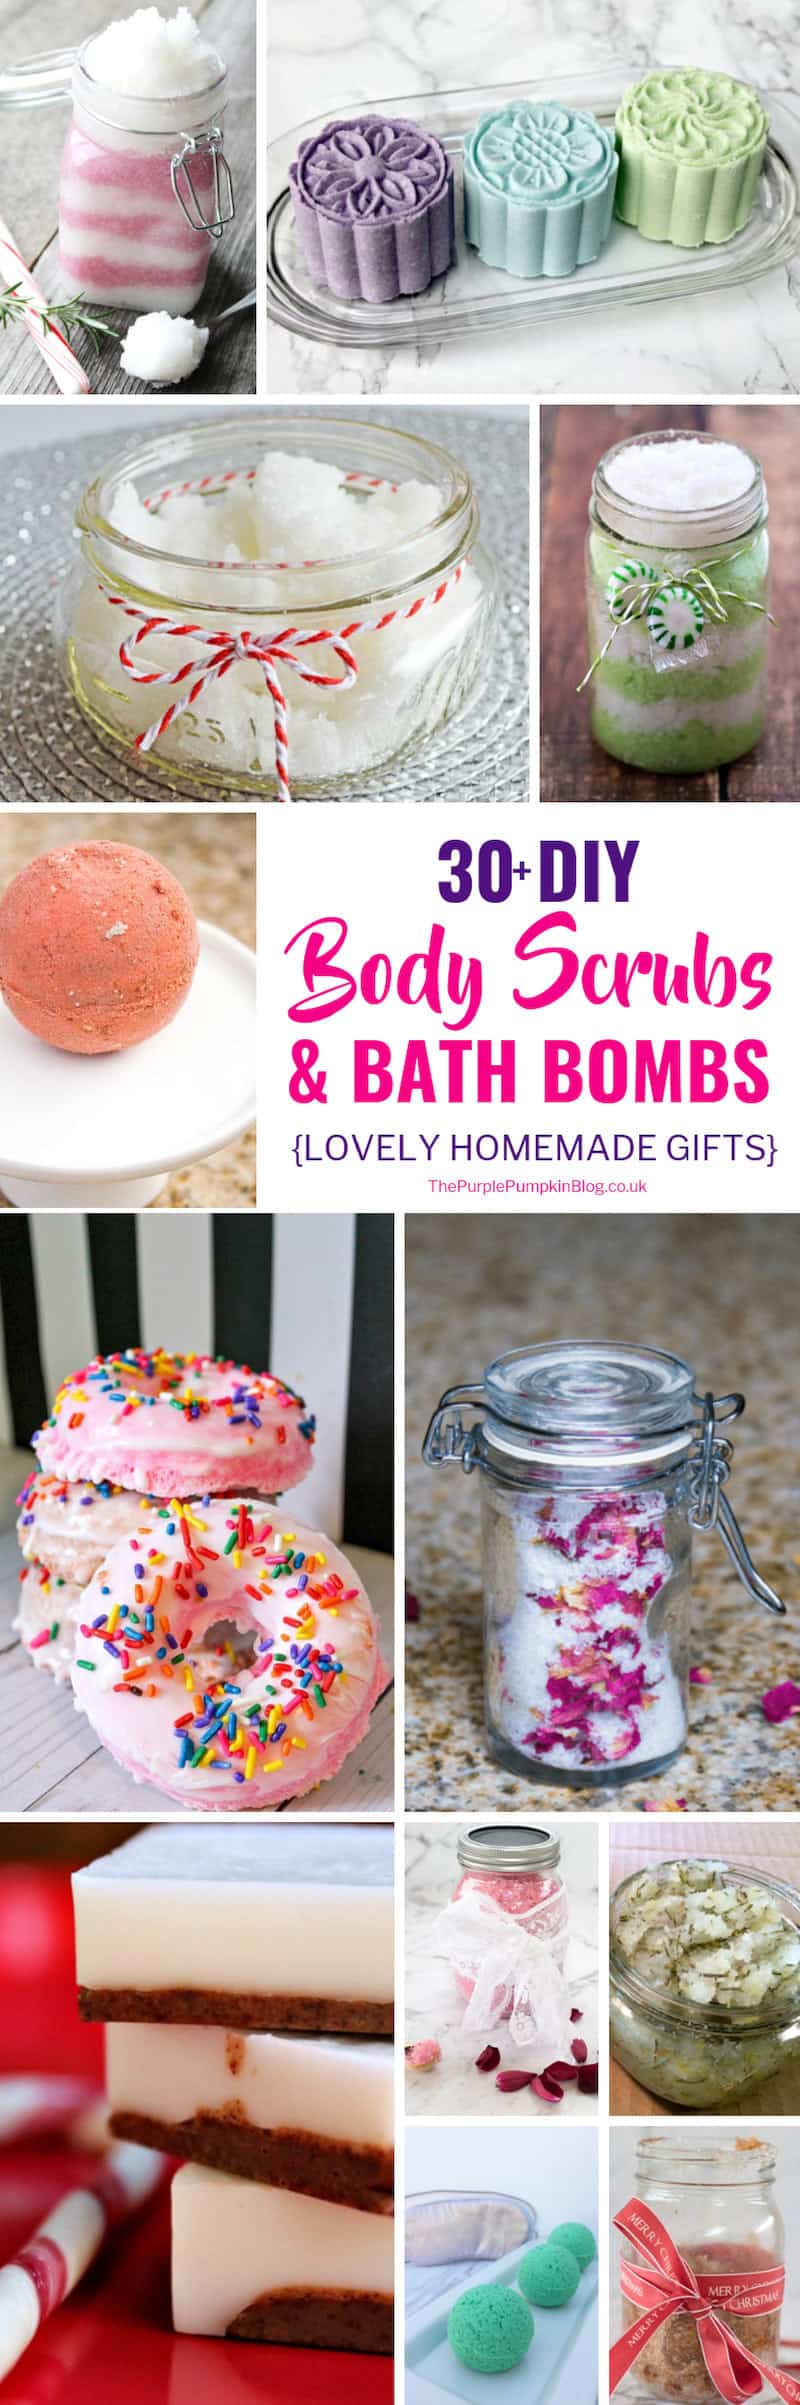 DIY Body Scrubs & Bath Bombs make lovely homemade gifts for Christmas or throughout the year. Some of the supplies used in making these body scrubs and bath bombs can be found at home, so you might be able to get started making them right away! #homemadegifts #diybodyscrubs #diybathbombs #sugarscrubs